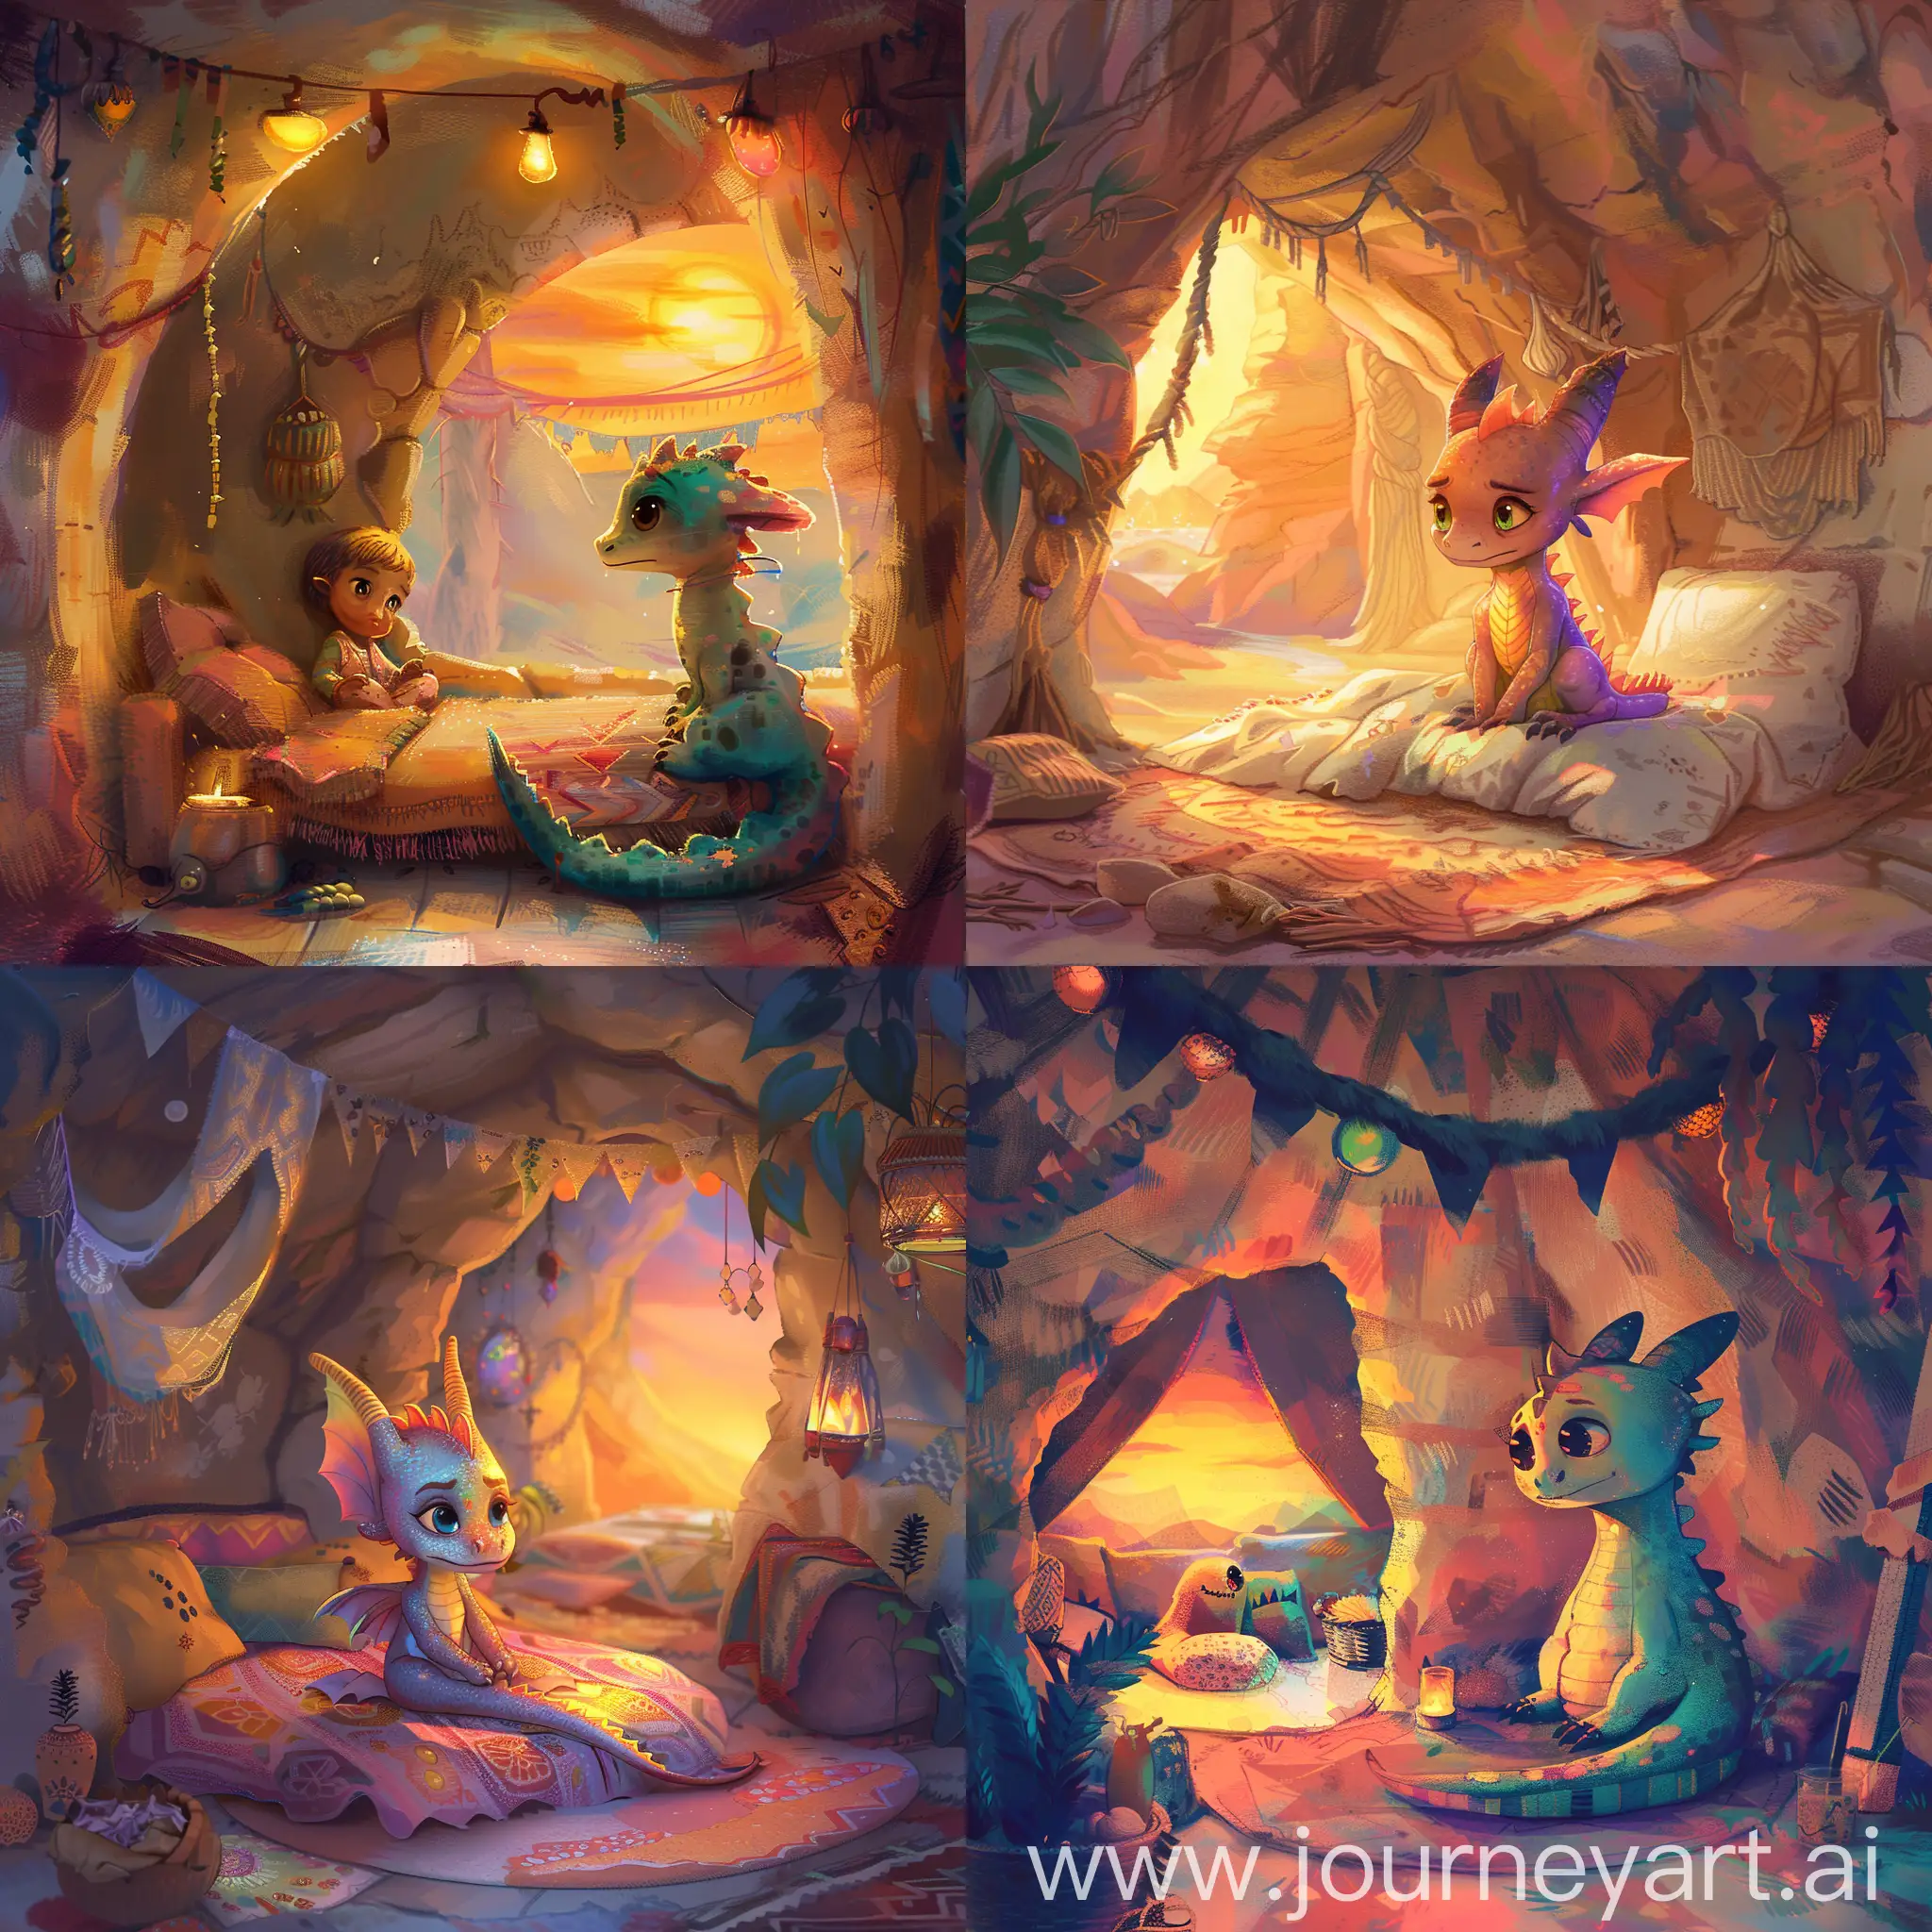 Adorable-Baby-Dragon-in-Sunset-Colors-Cozy-Bohemian-Cave-Scene-with-Mother